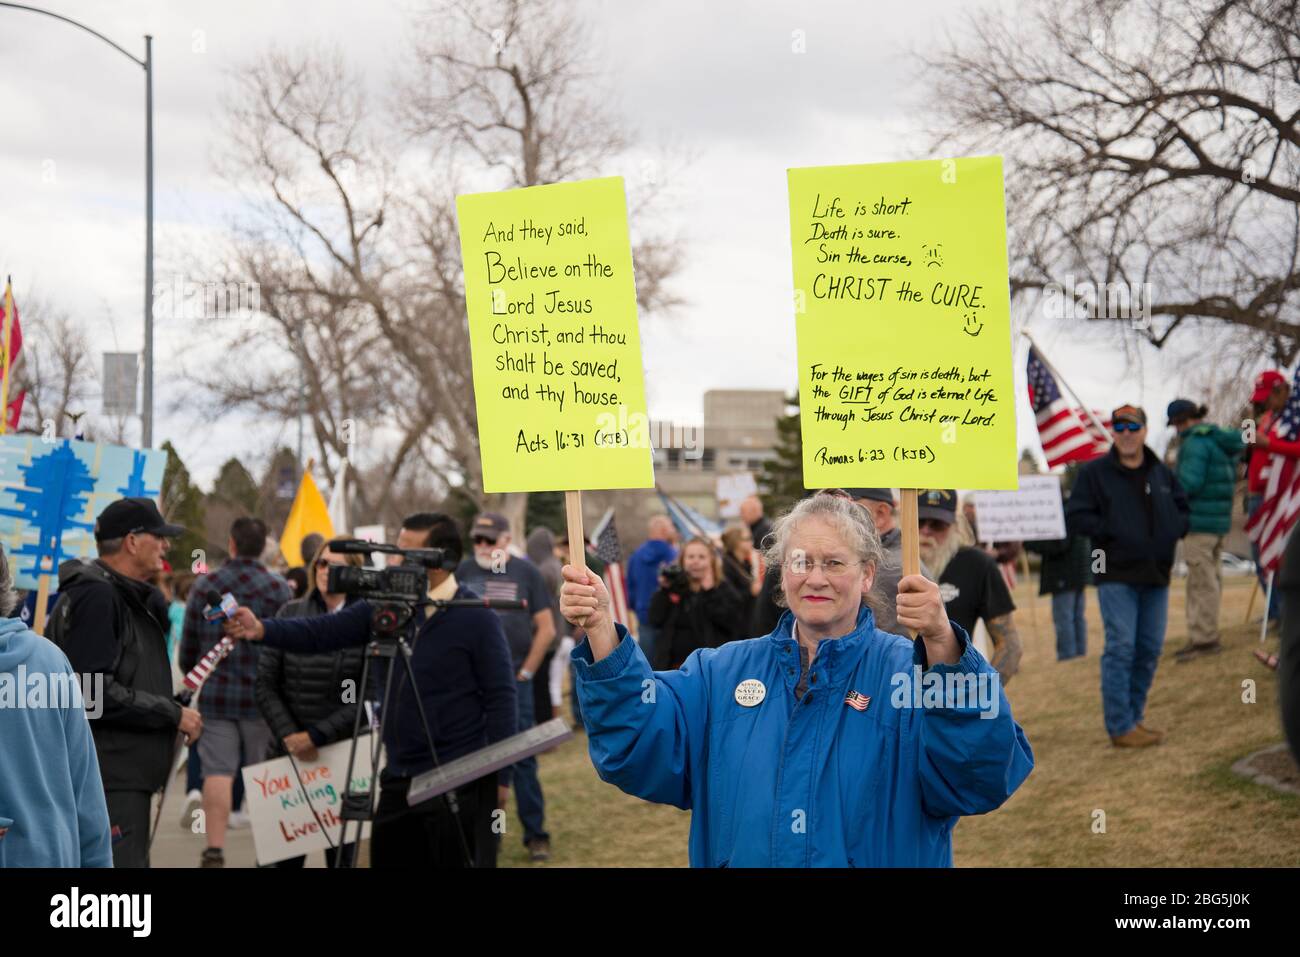 Helena, Montana - April 19, 2020: Senior citizen female protestor holding Bible scripture signs at a prayer rally at the state Capitol. Protesting the Stock Photo